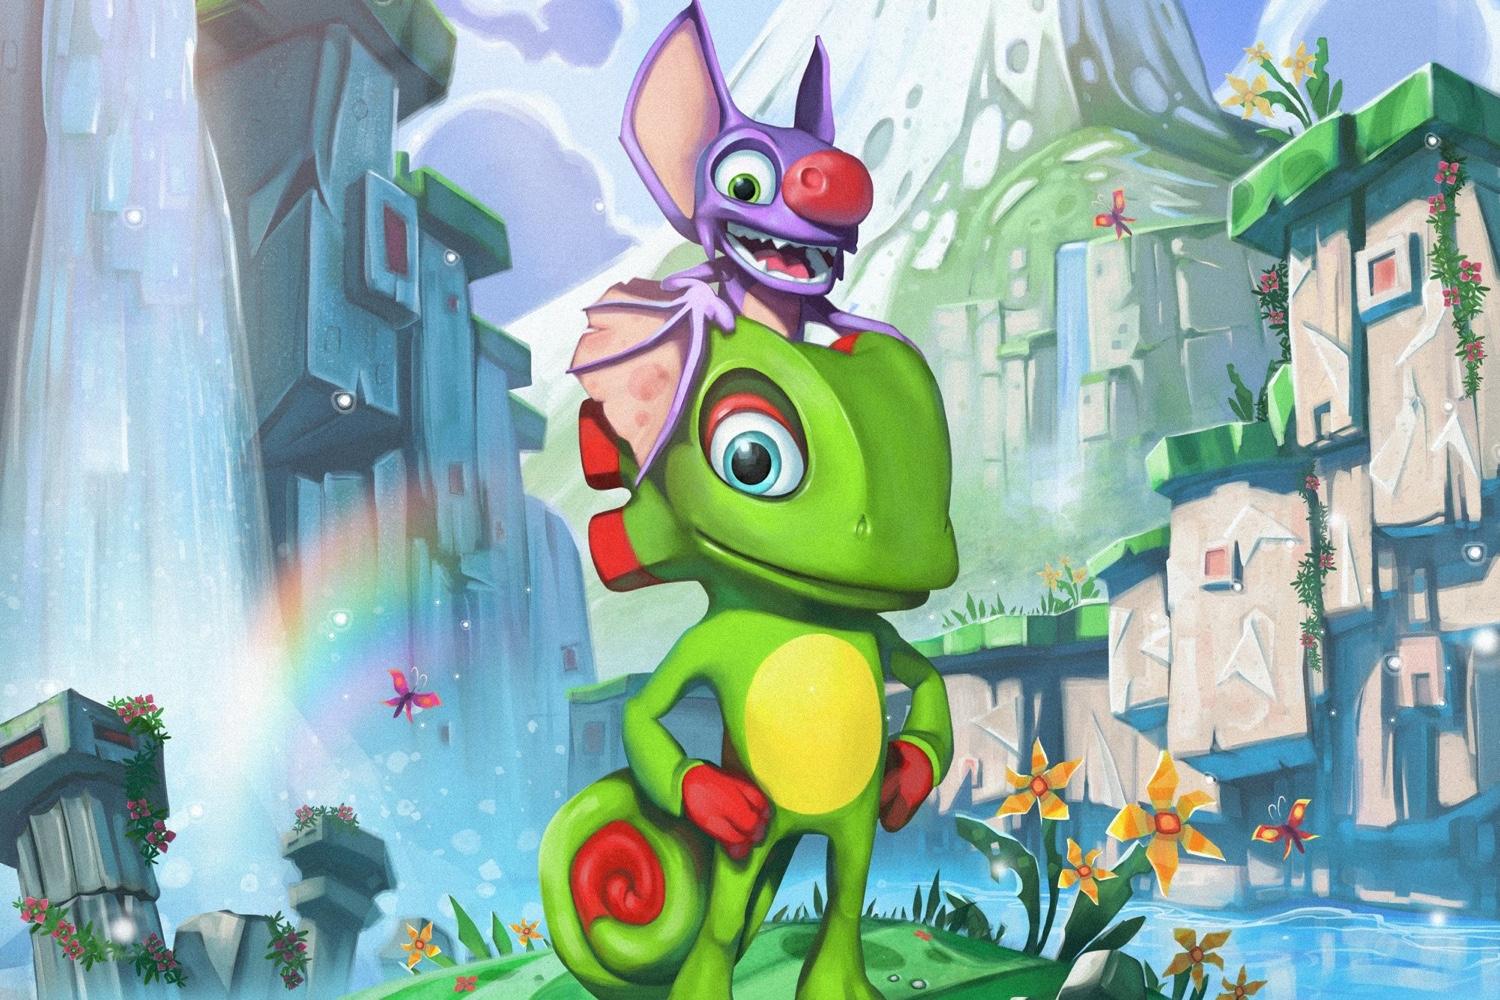 Yooka-Laylee and the Impossible Lair Free Demo Out Now